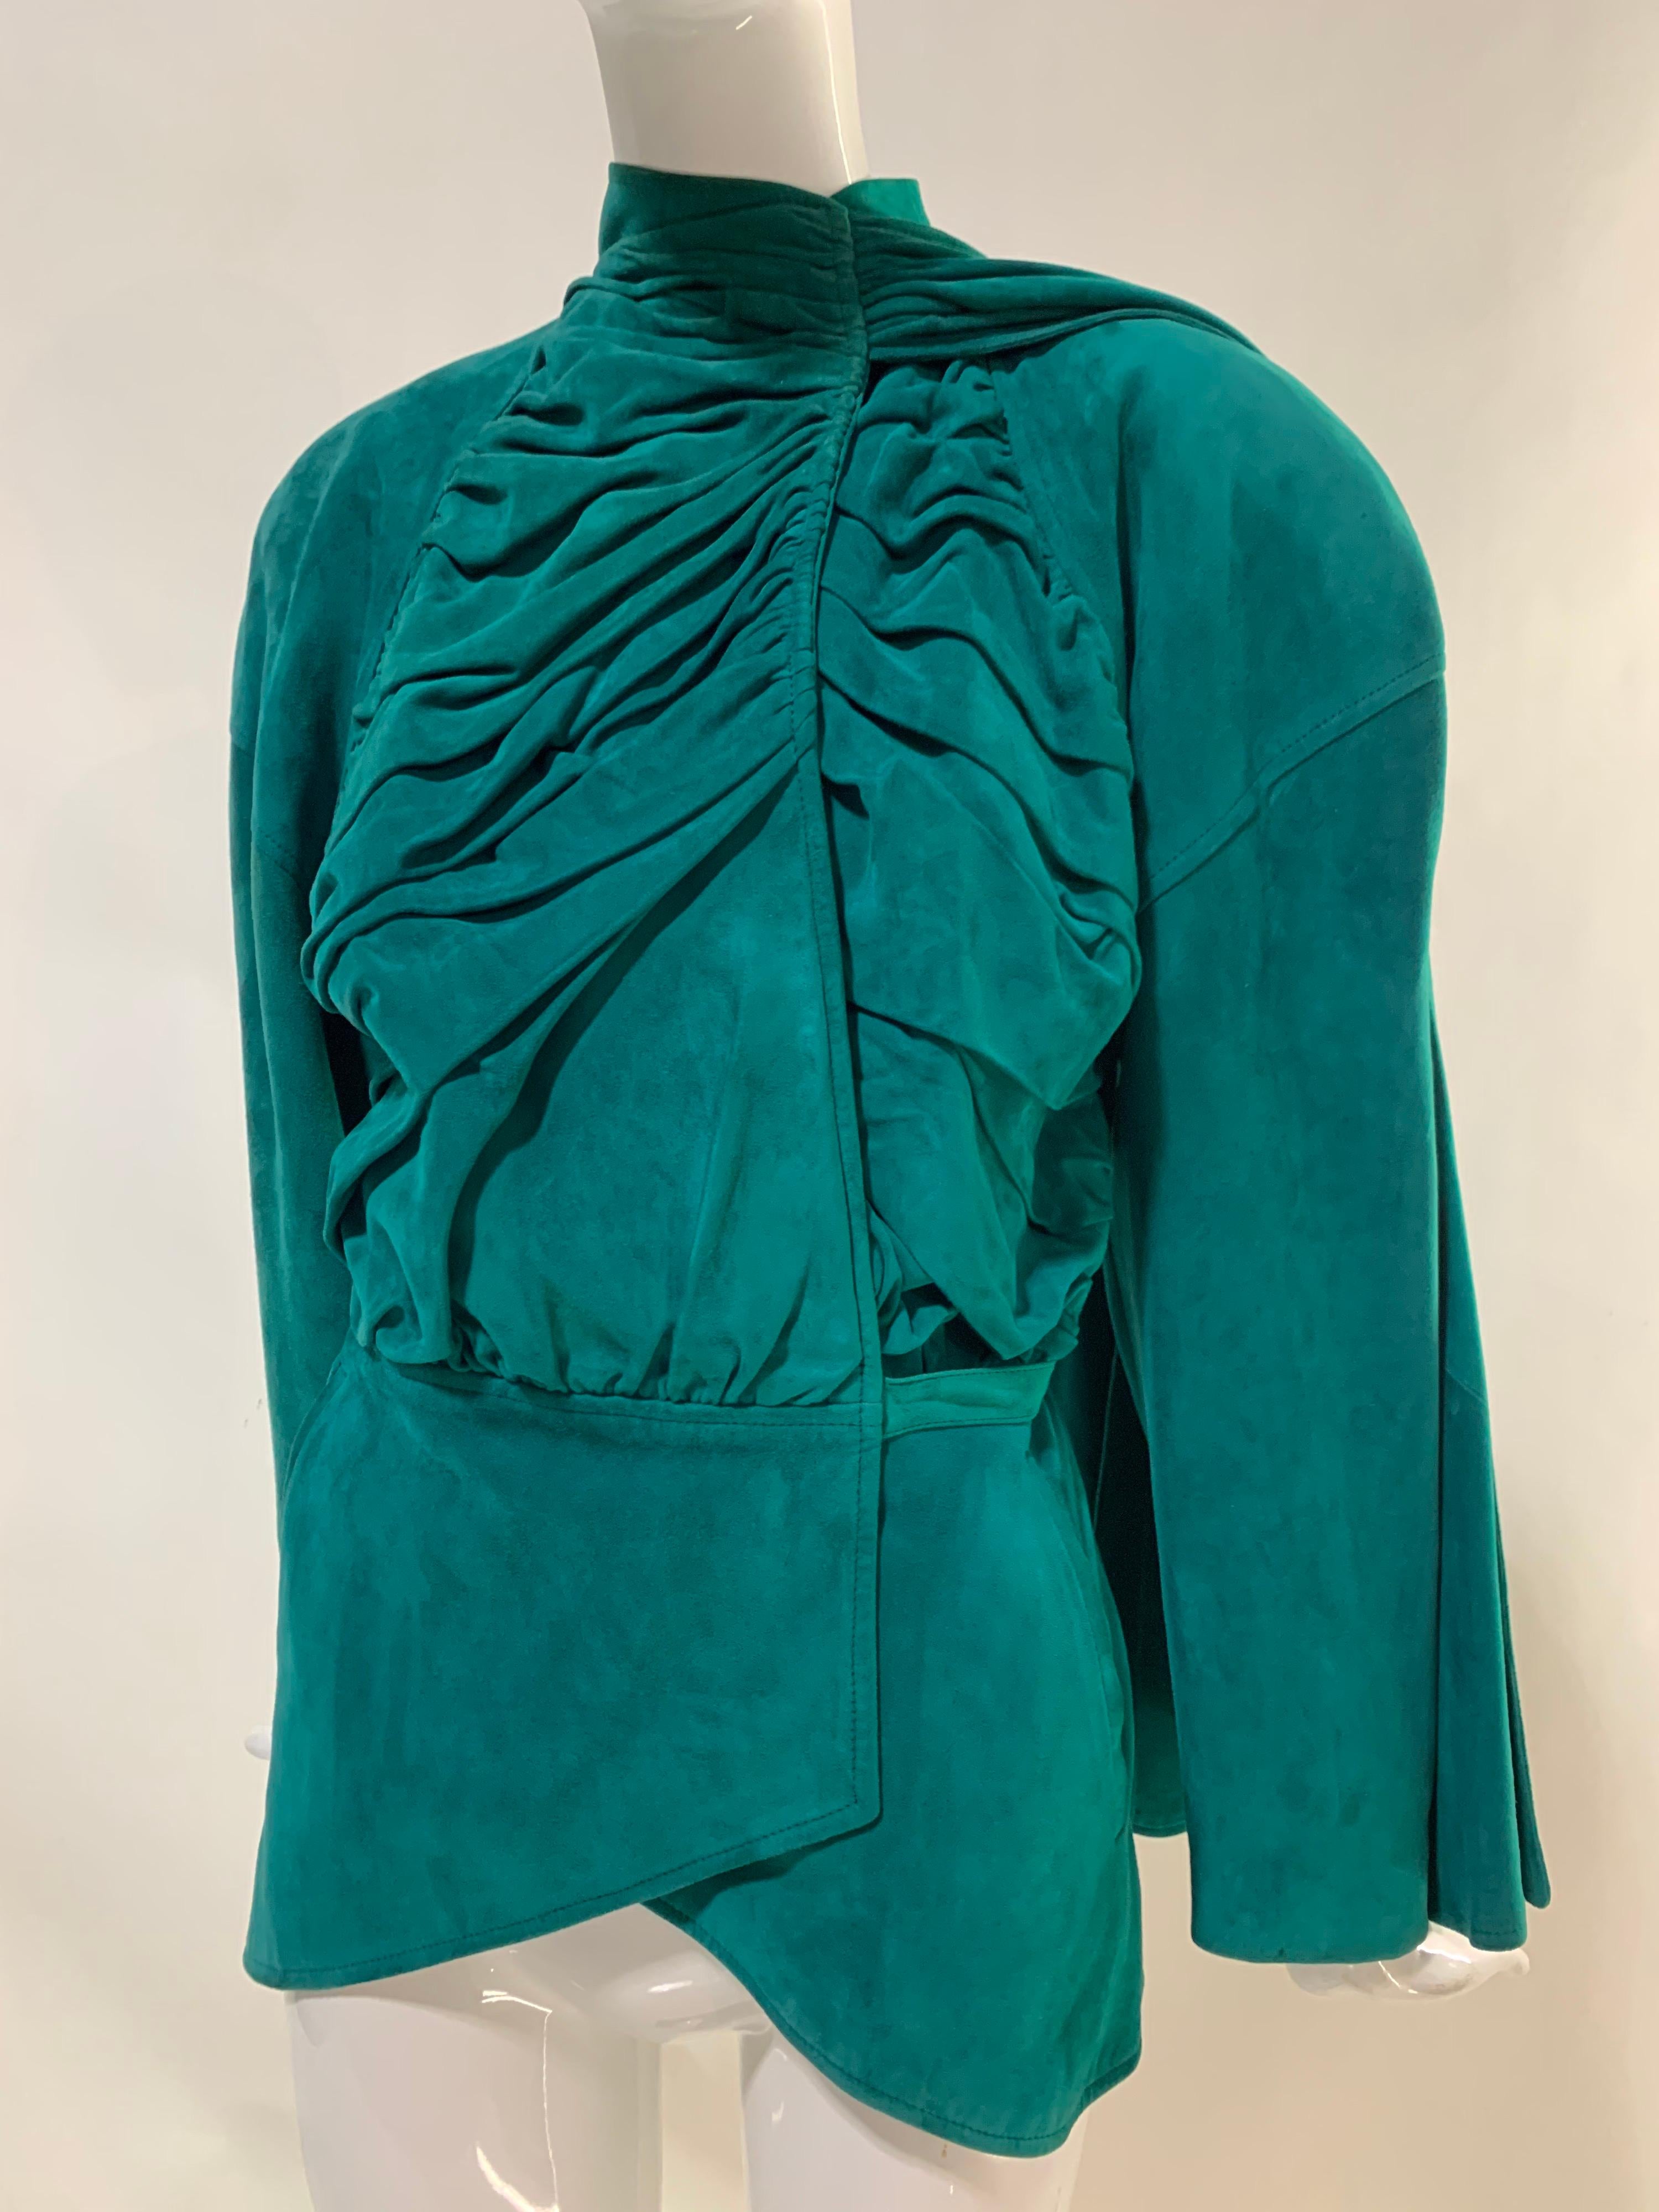 A striking 1980s Jean Claude Jitrois emerald green super-soft suede art-to-wear biker's jacket with asymmetrical ruched front, waist wrap-around tie and large suede foulard attached at one side to throw over the opposite shoulder. Instant attitude